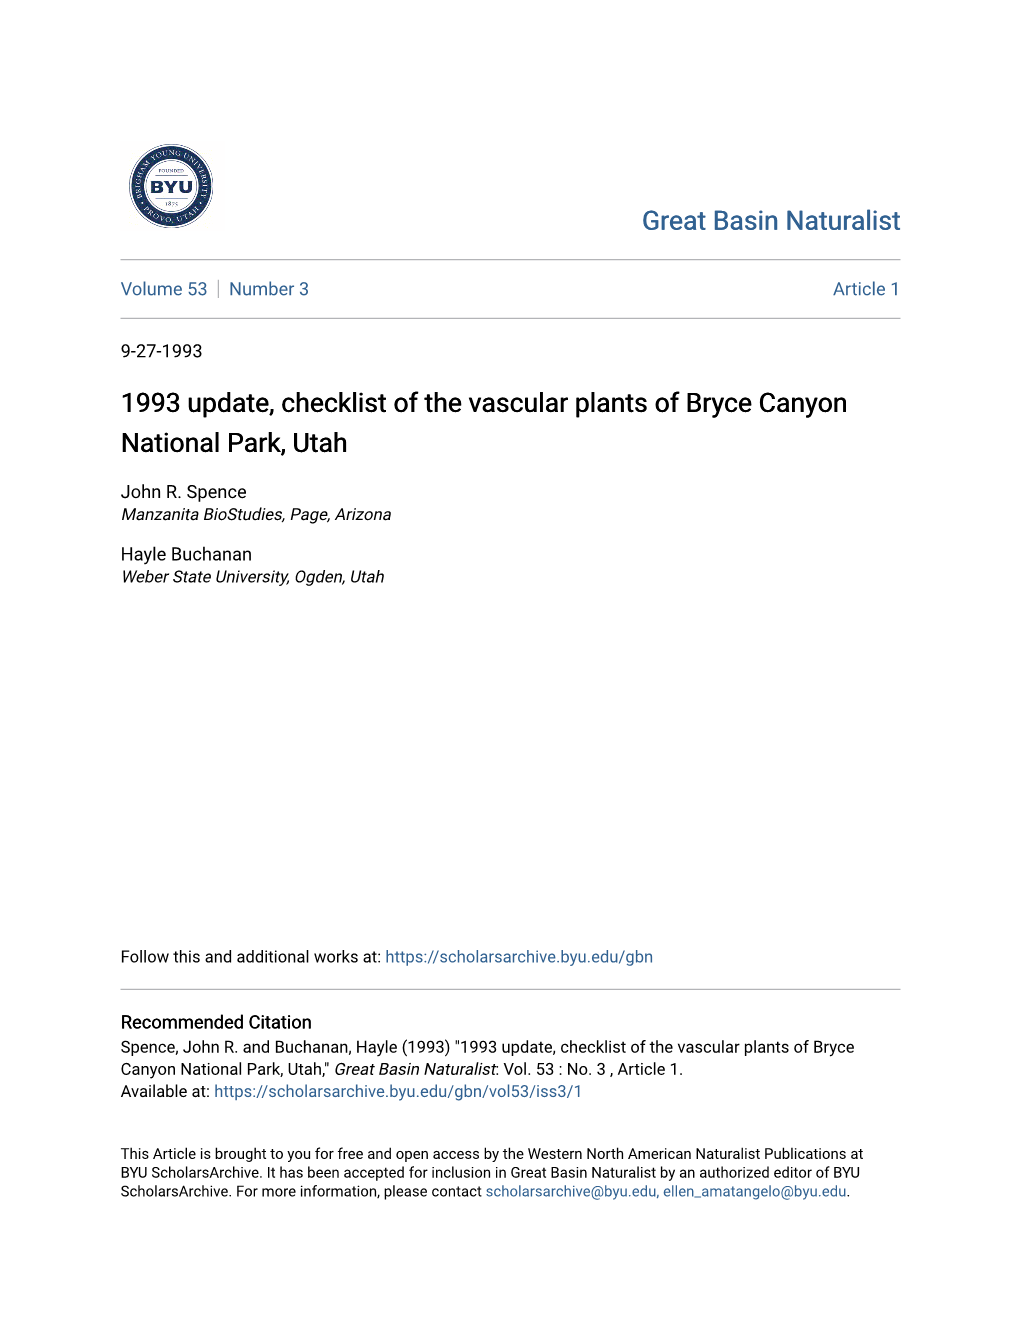 1993 Update, Checklist of the Vascular Plants of Bryce Canyon National Park, Utah